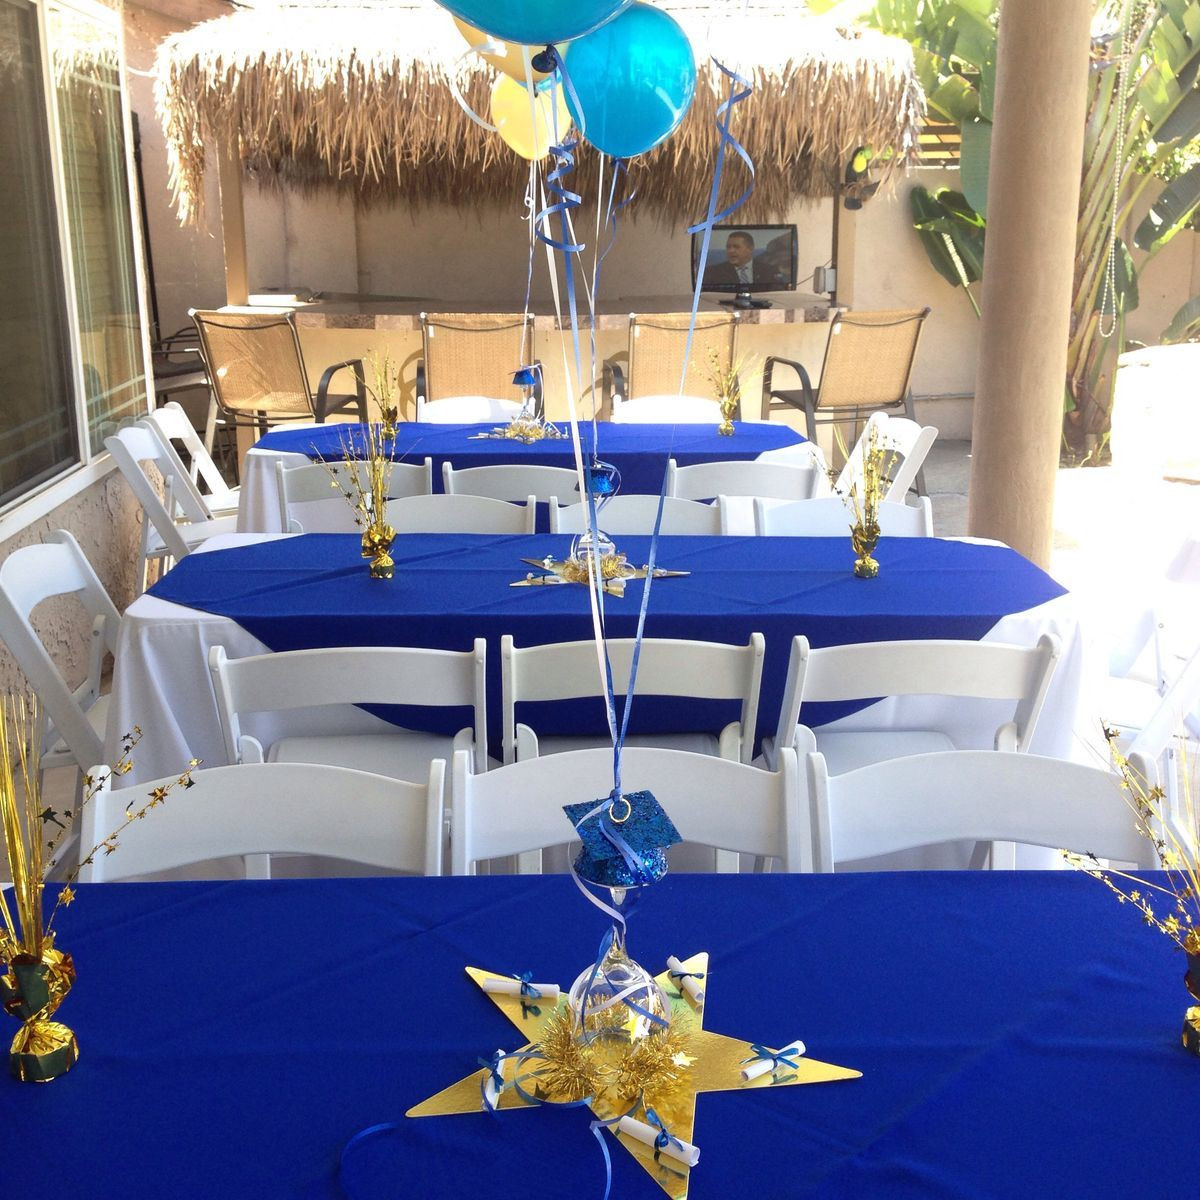 Table Decoration Ideas For High School Graduation Party
 Pin by Jen Smith on Graduation